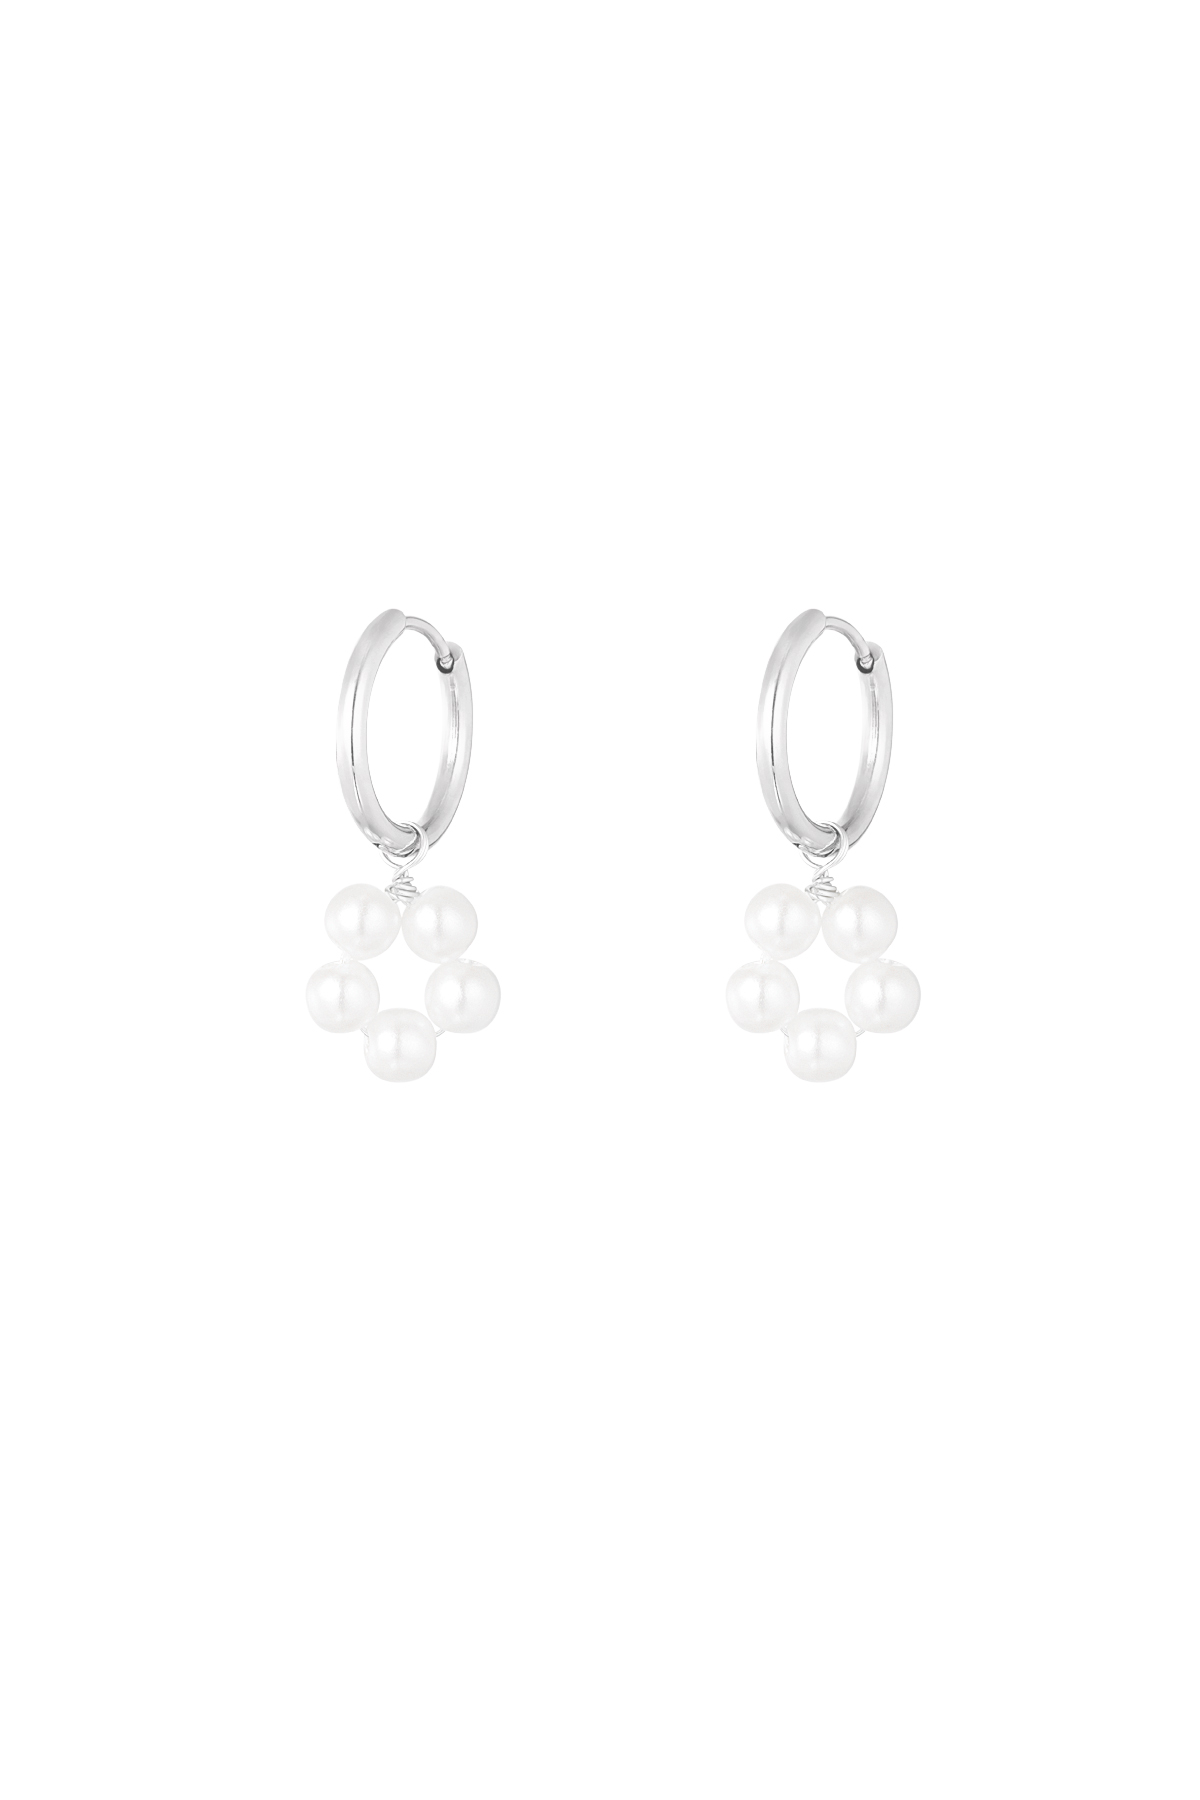 Earring with pearl flower pendant - silver h5 